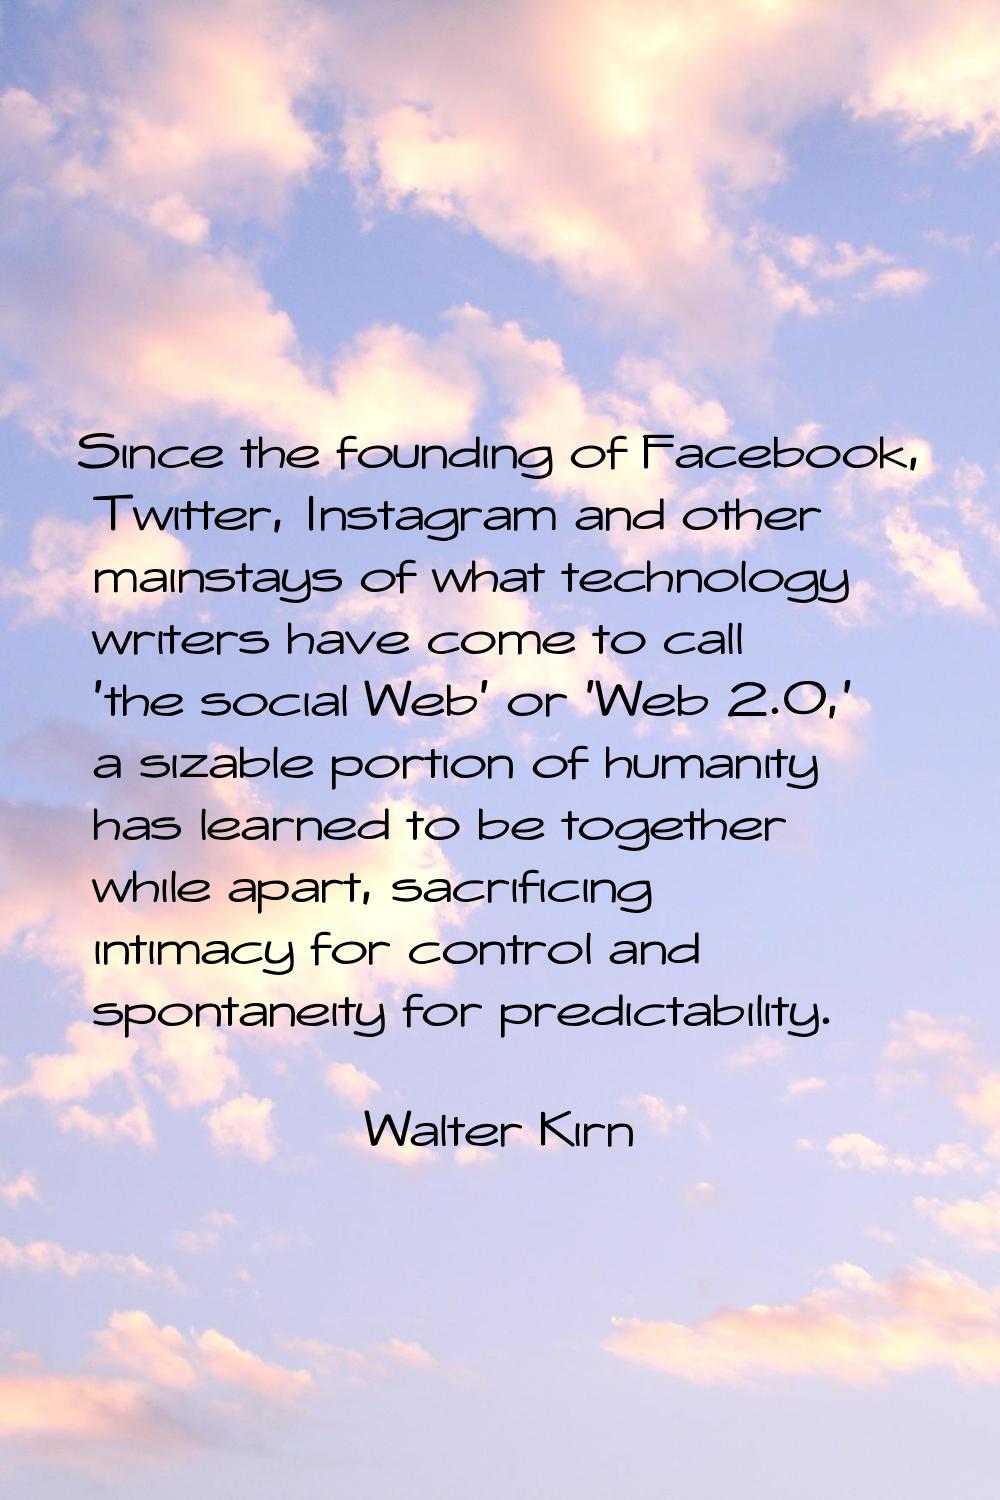 Since the founding of Facebook, Twitter, Instagram and other mainstays of what technology writers h